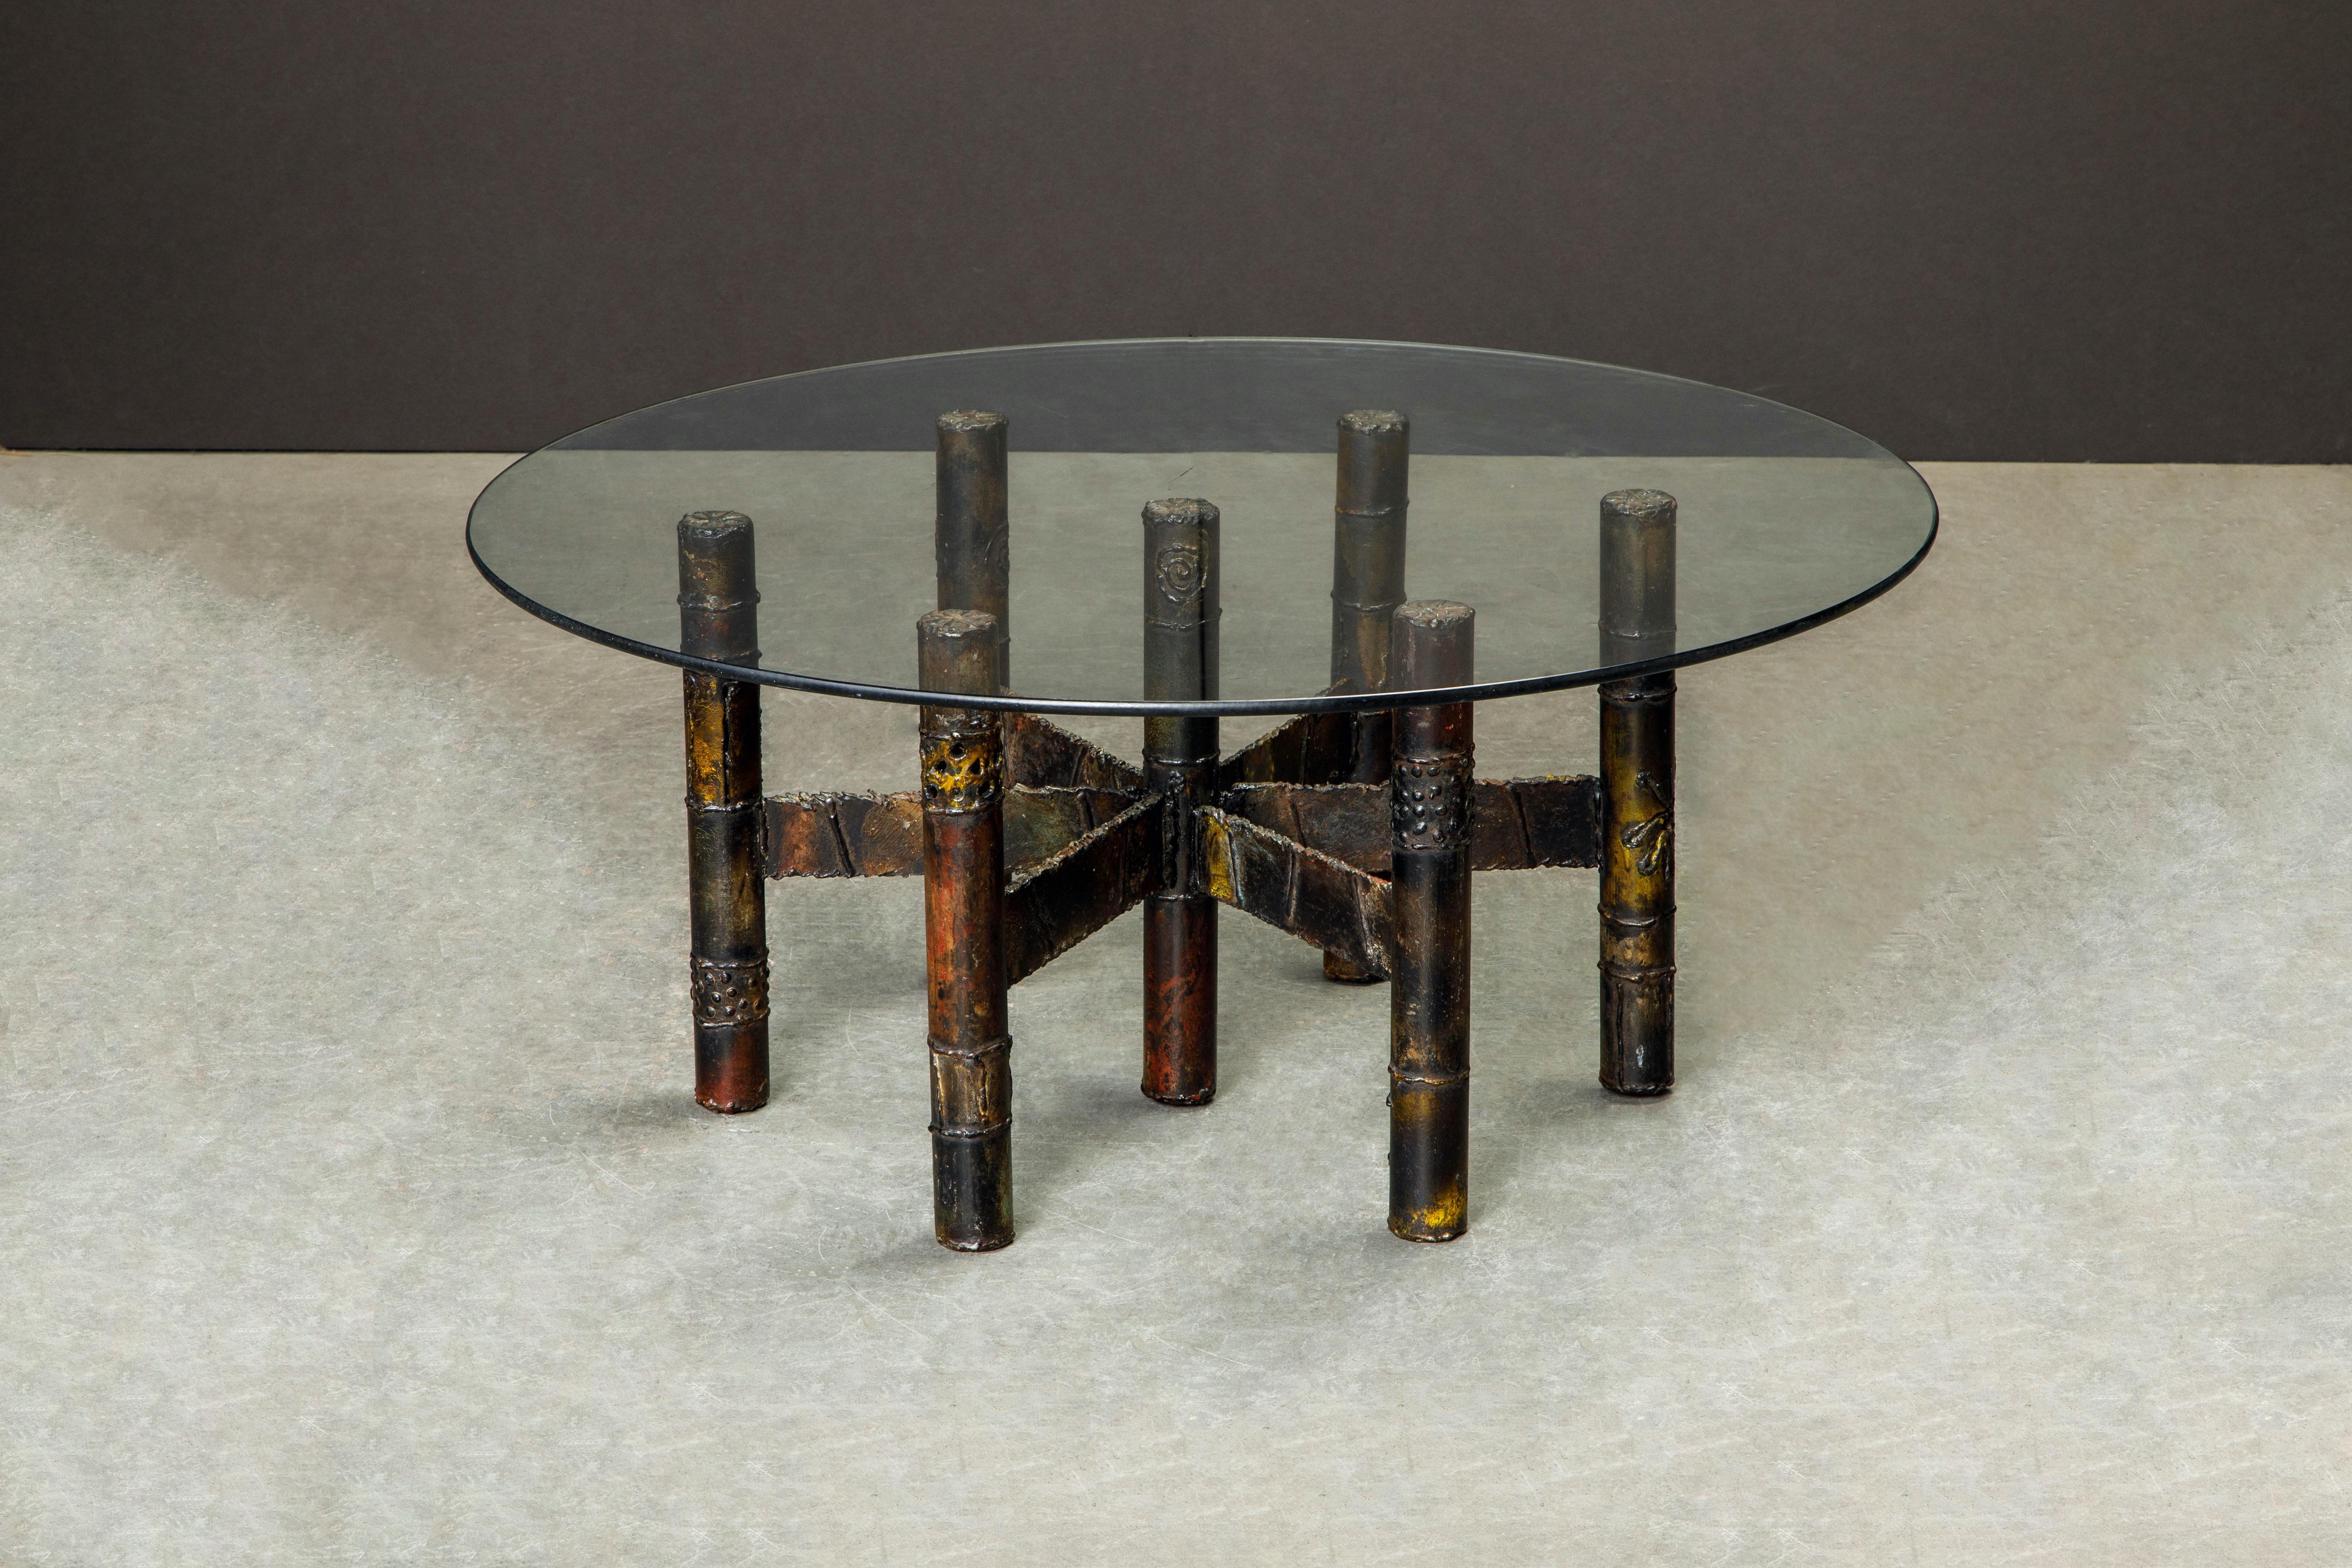 A stunning Paul Evans brutalist Cocktail table which was part of the 